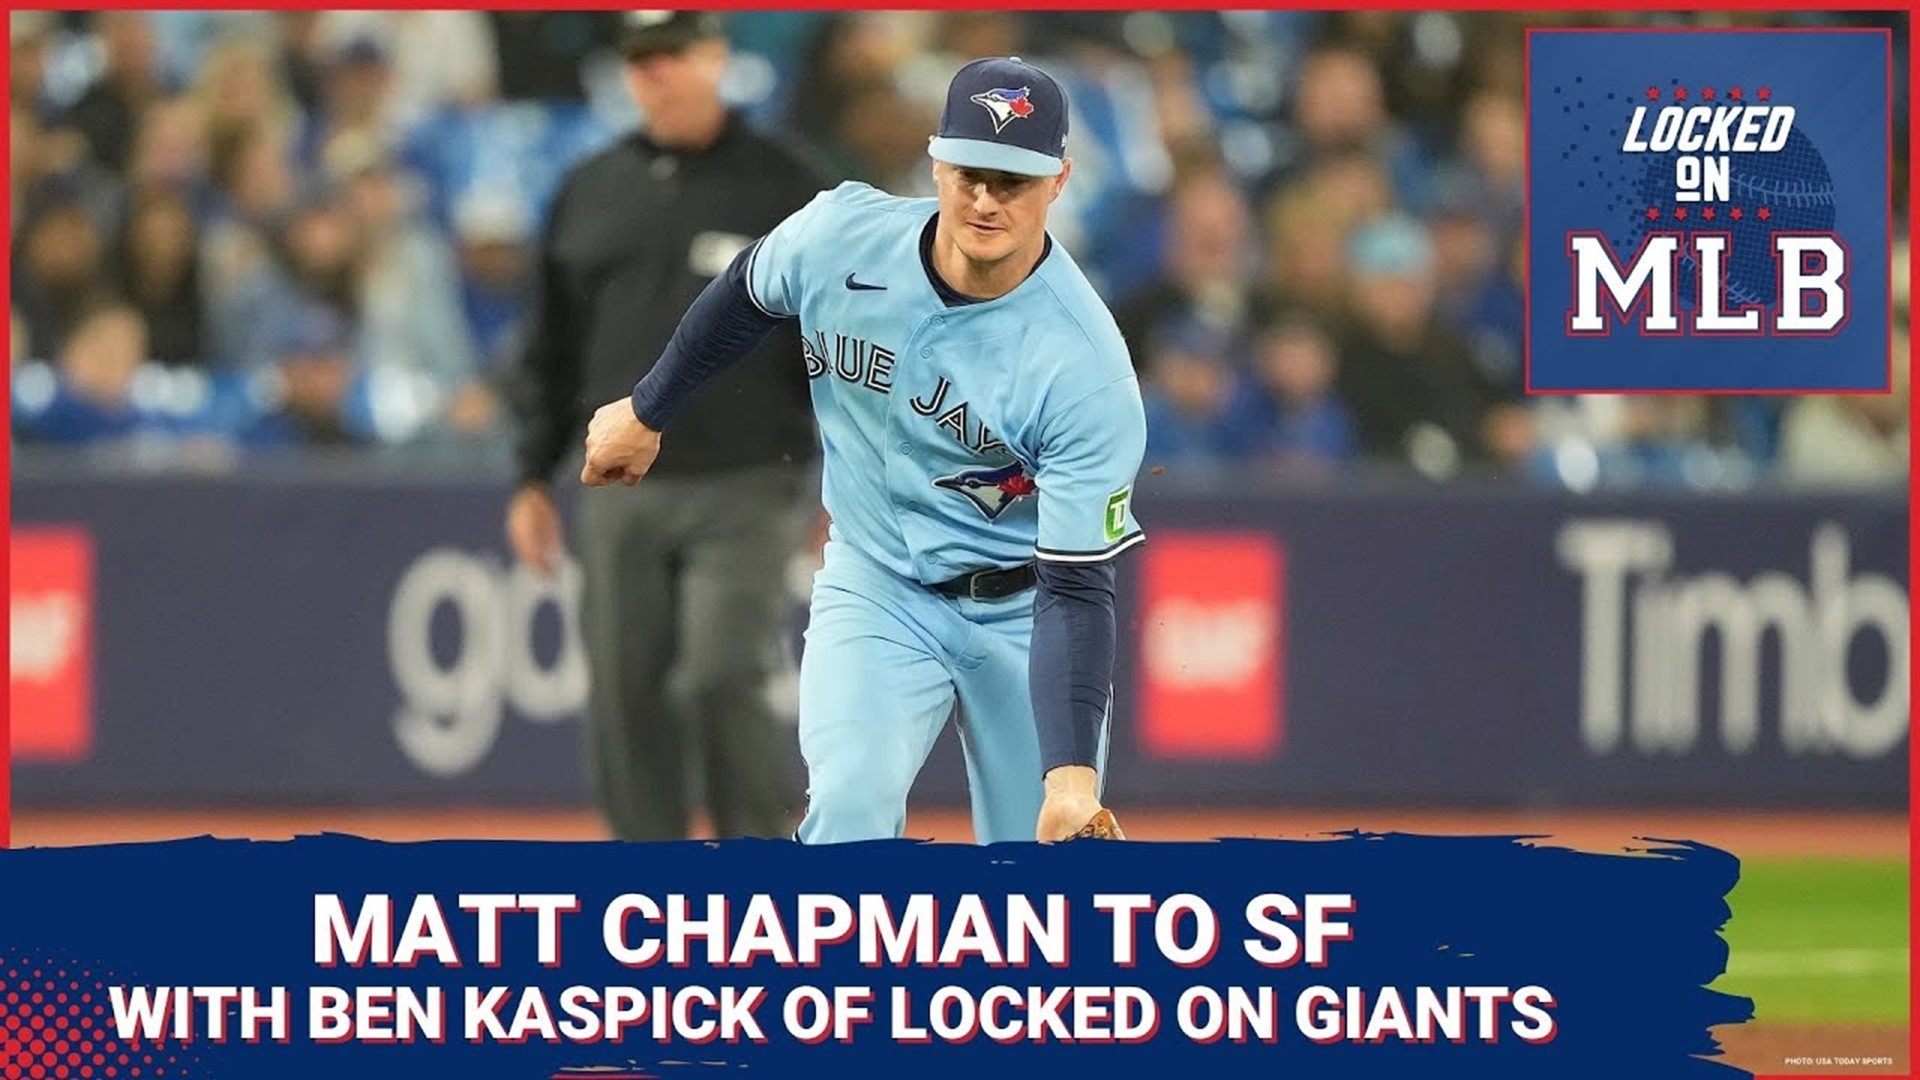 Matt Chapman signed with the Giants, giving the team much needed depth. Now should they set their sites on Blake Snell?